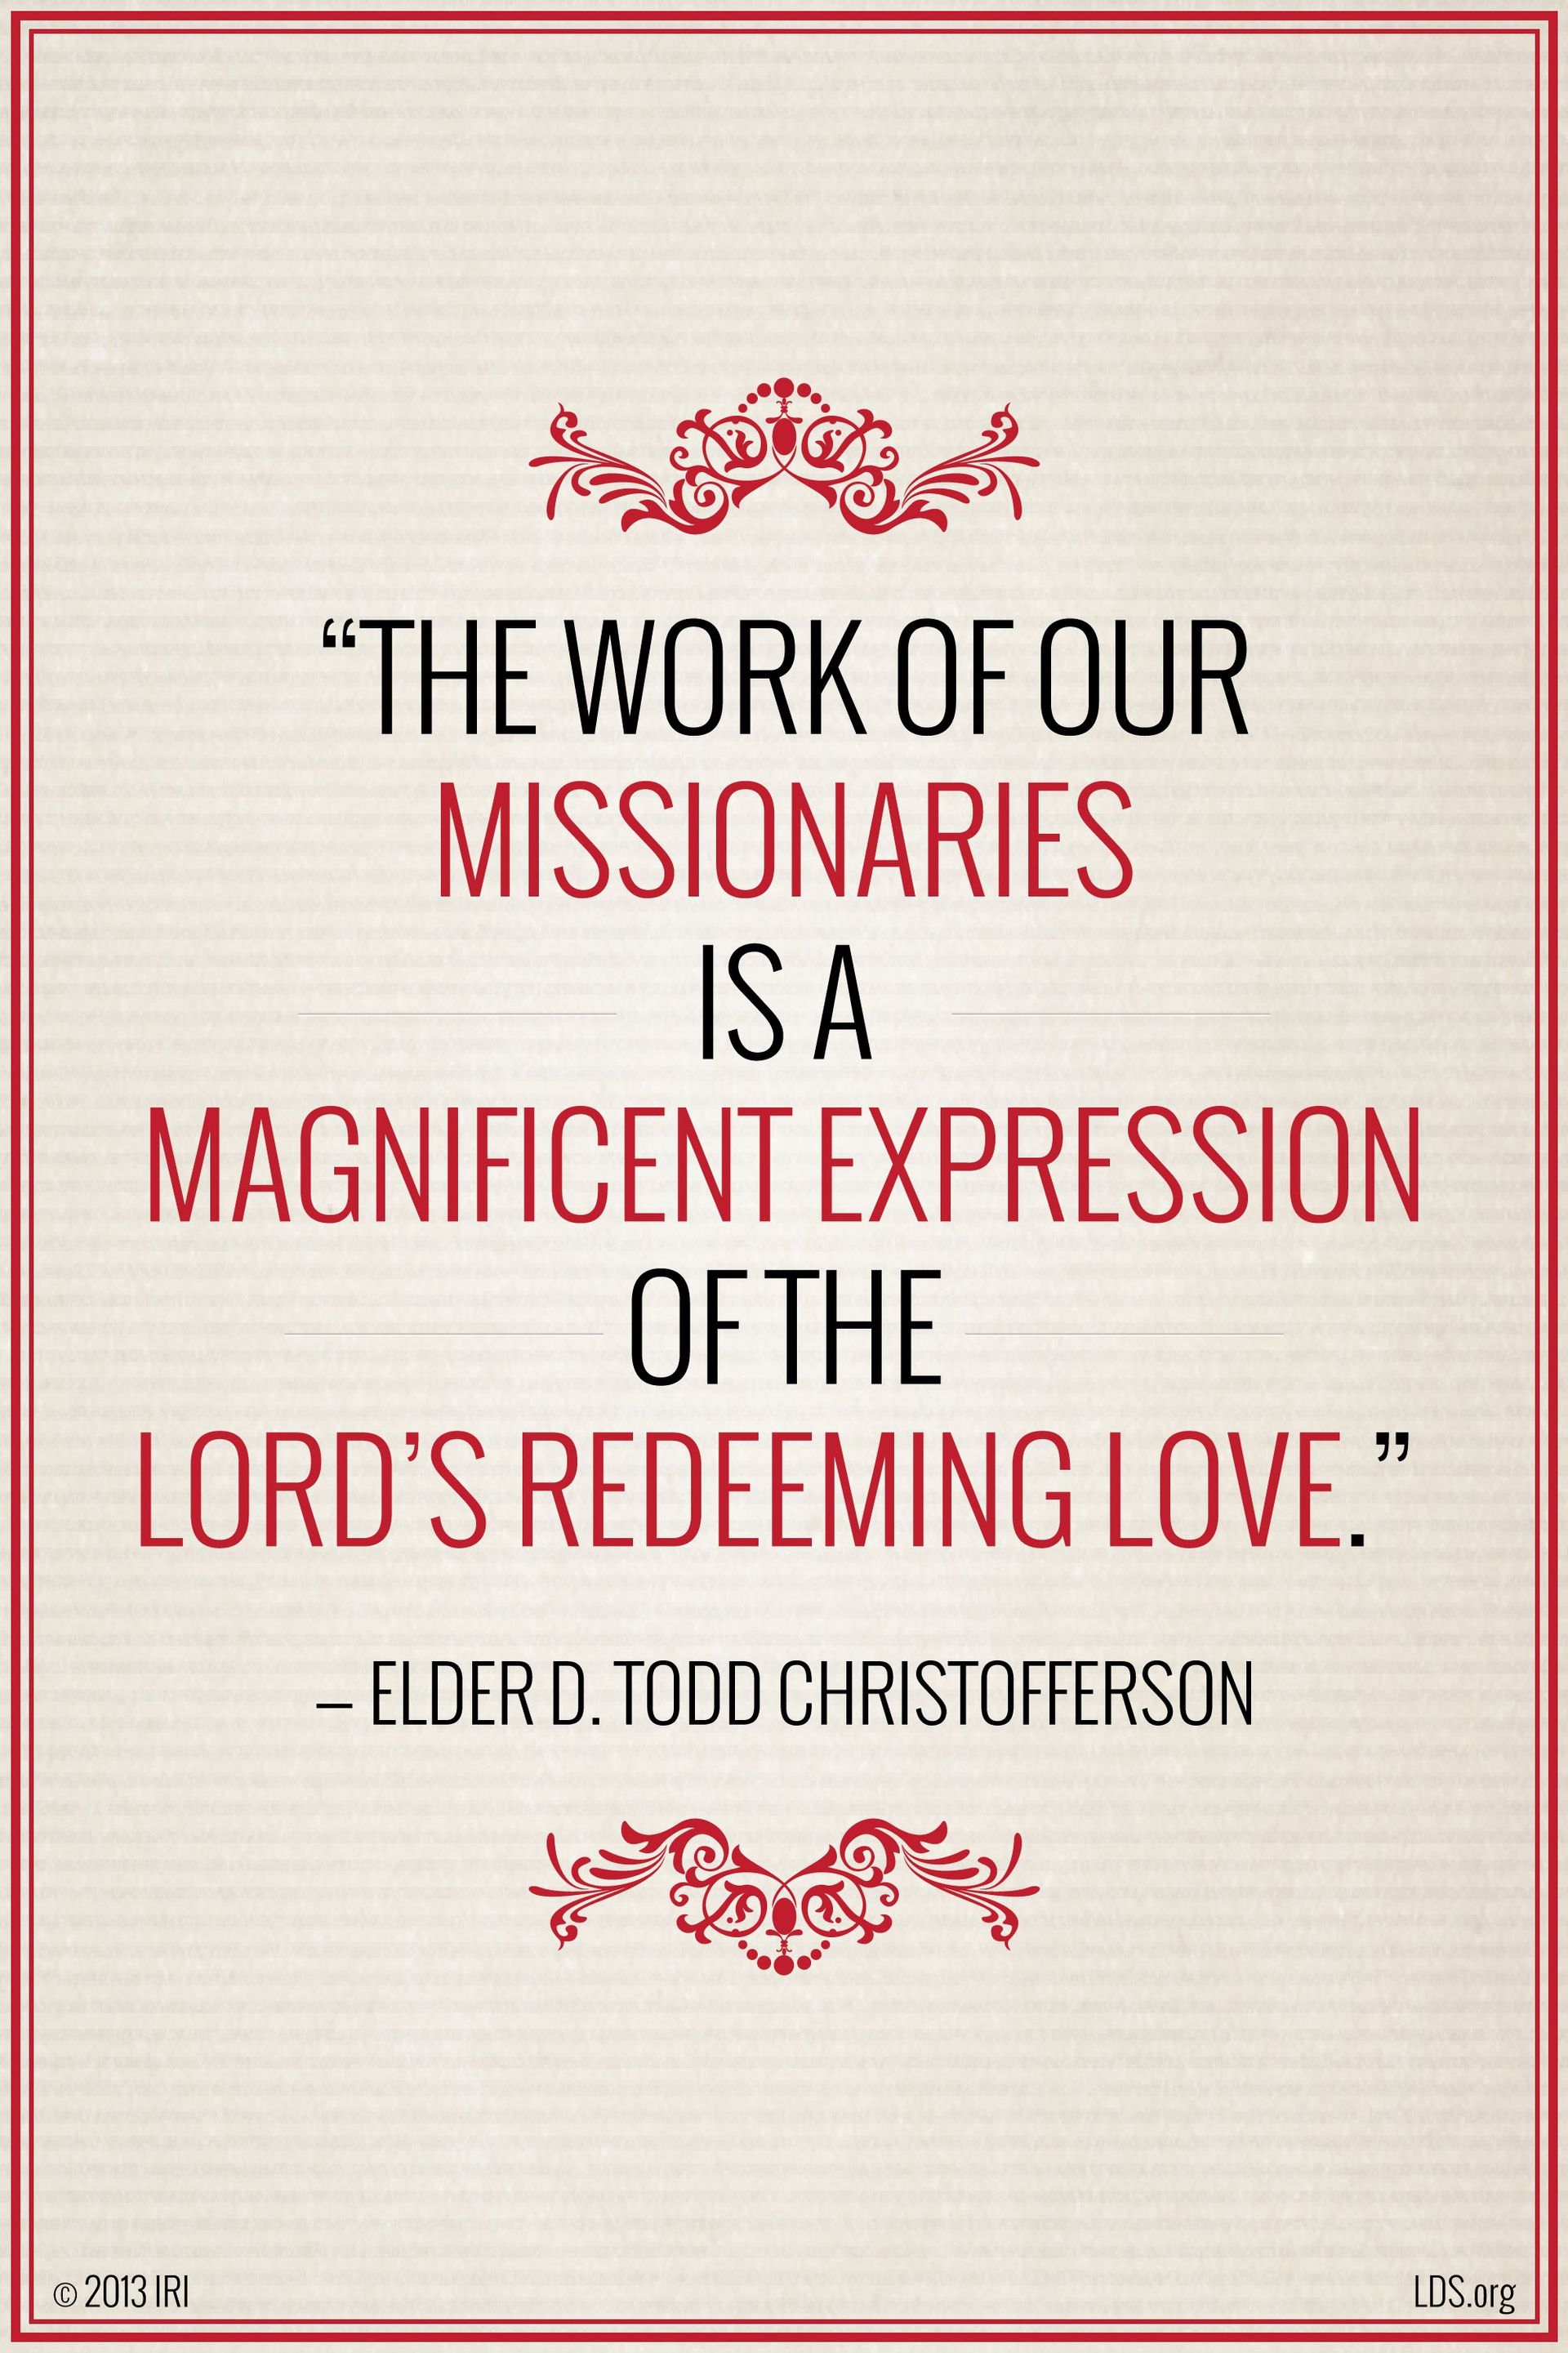 “The work of our missionaries is a magnificent expression of the Lord’s redeeming love.”—Elder D. Todd Christofferson, “Redemption”